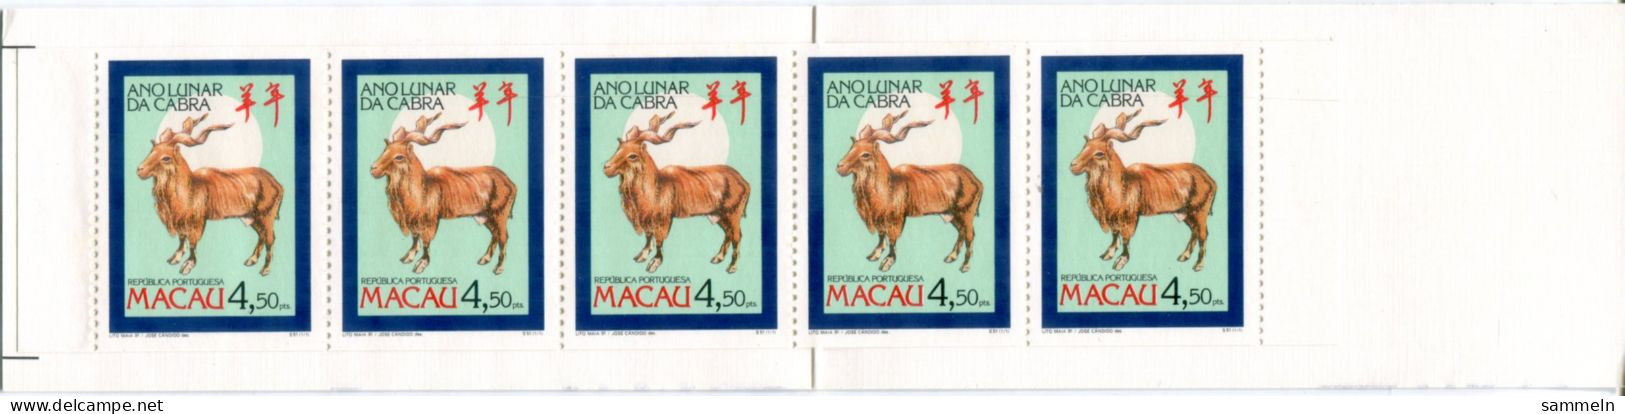 MACAO 667 C MH Mnh - Chinesisches Jahr Des Schafes, Chinese Year Of The Sheep, Année Chinoise Du Mouton - MACAU - Carnets